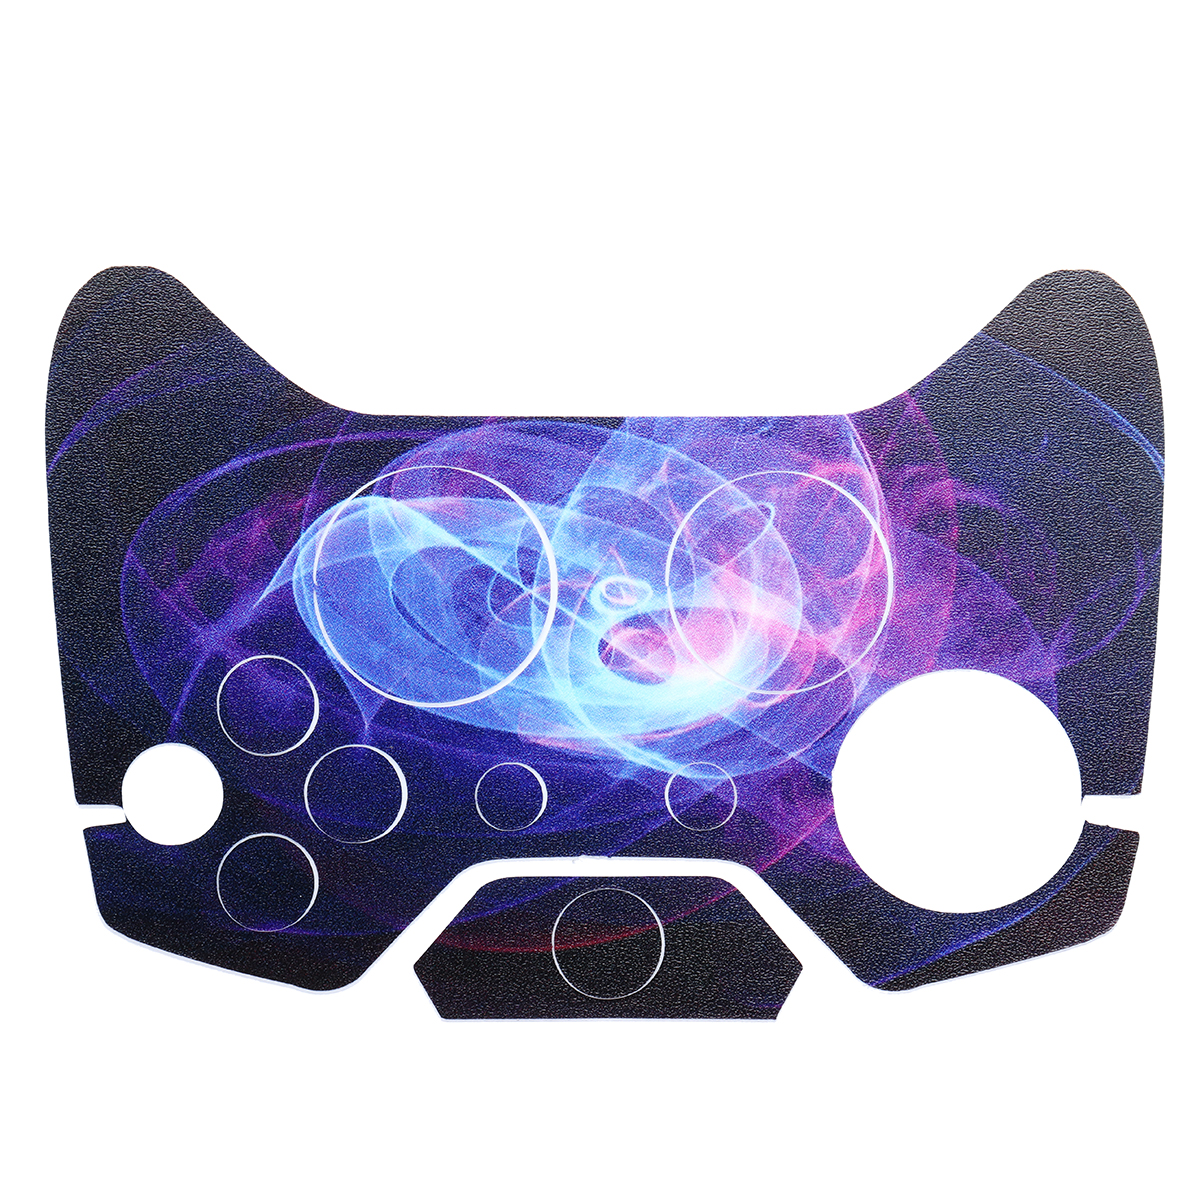 Purple Protective Vinyl Decal Skin Stickers Wrap Cover For Xbox One Game Console Game Controller Kinect 32